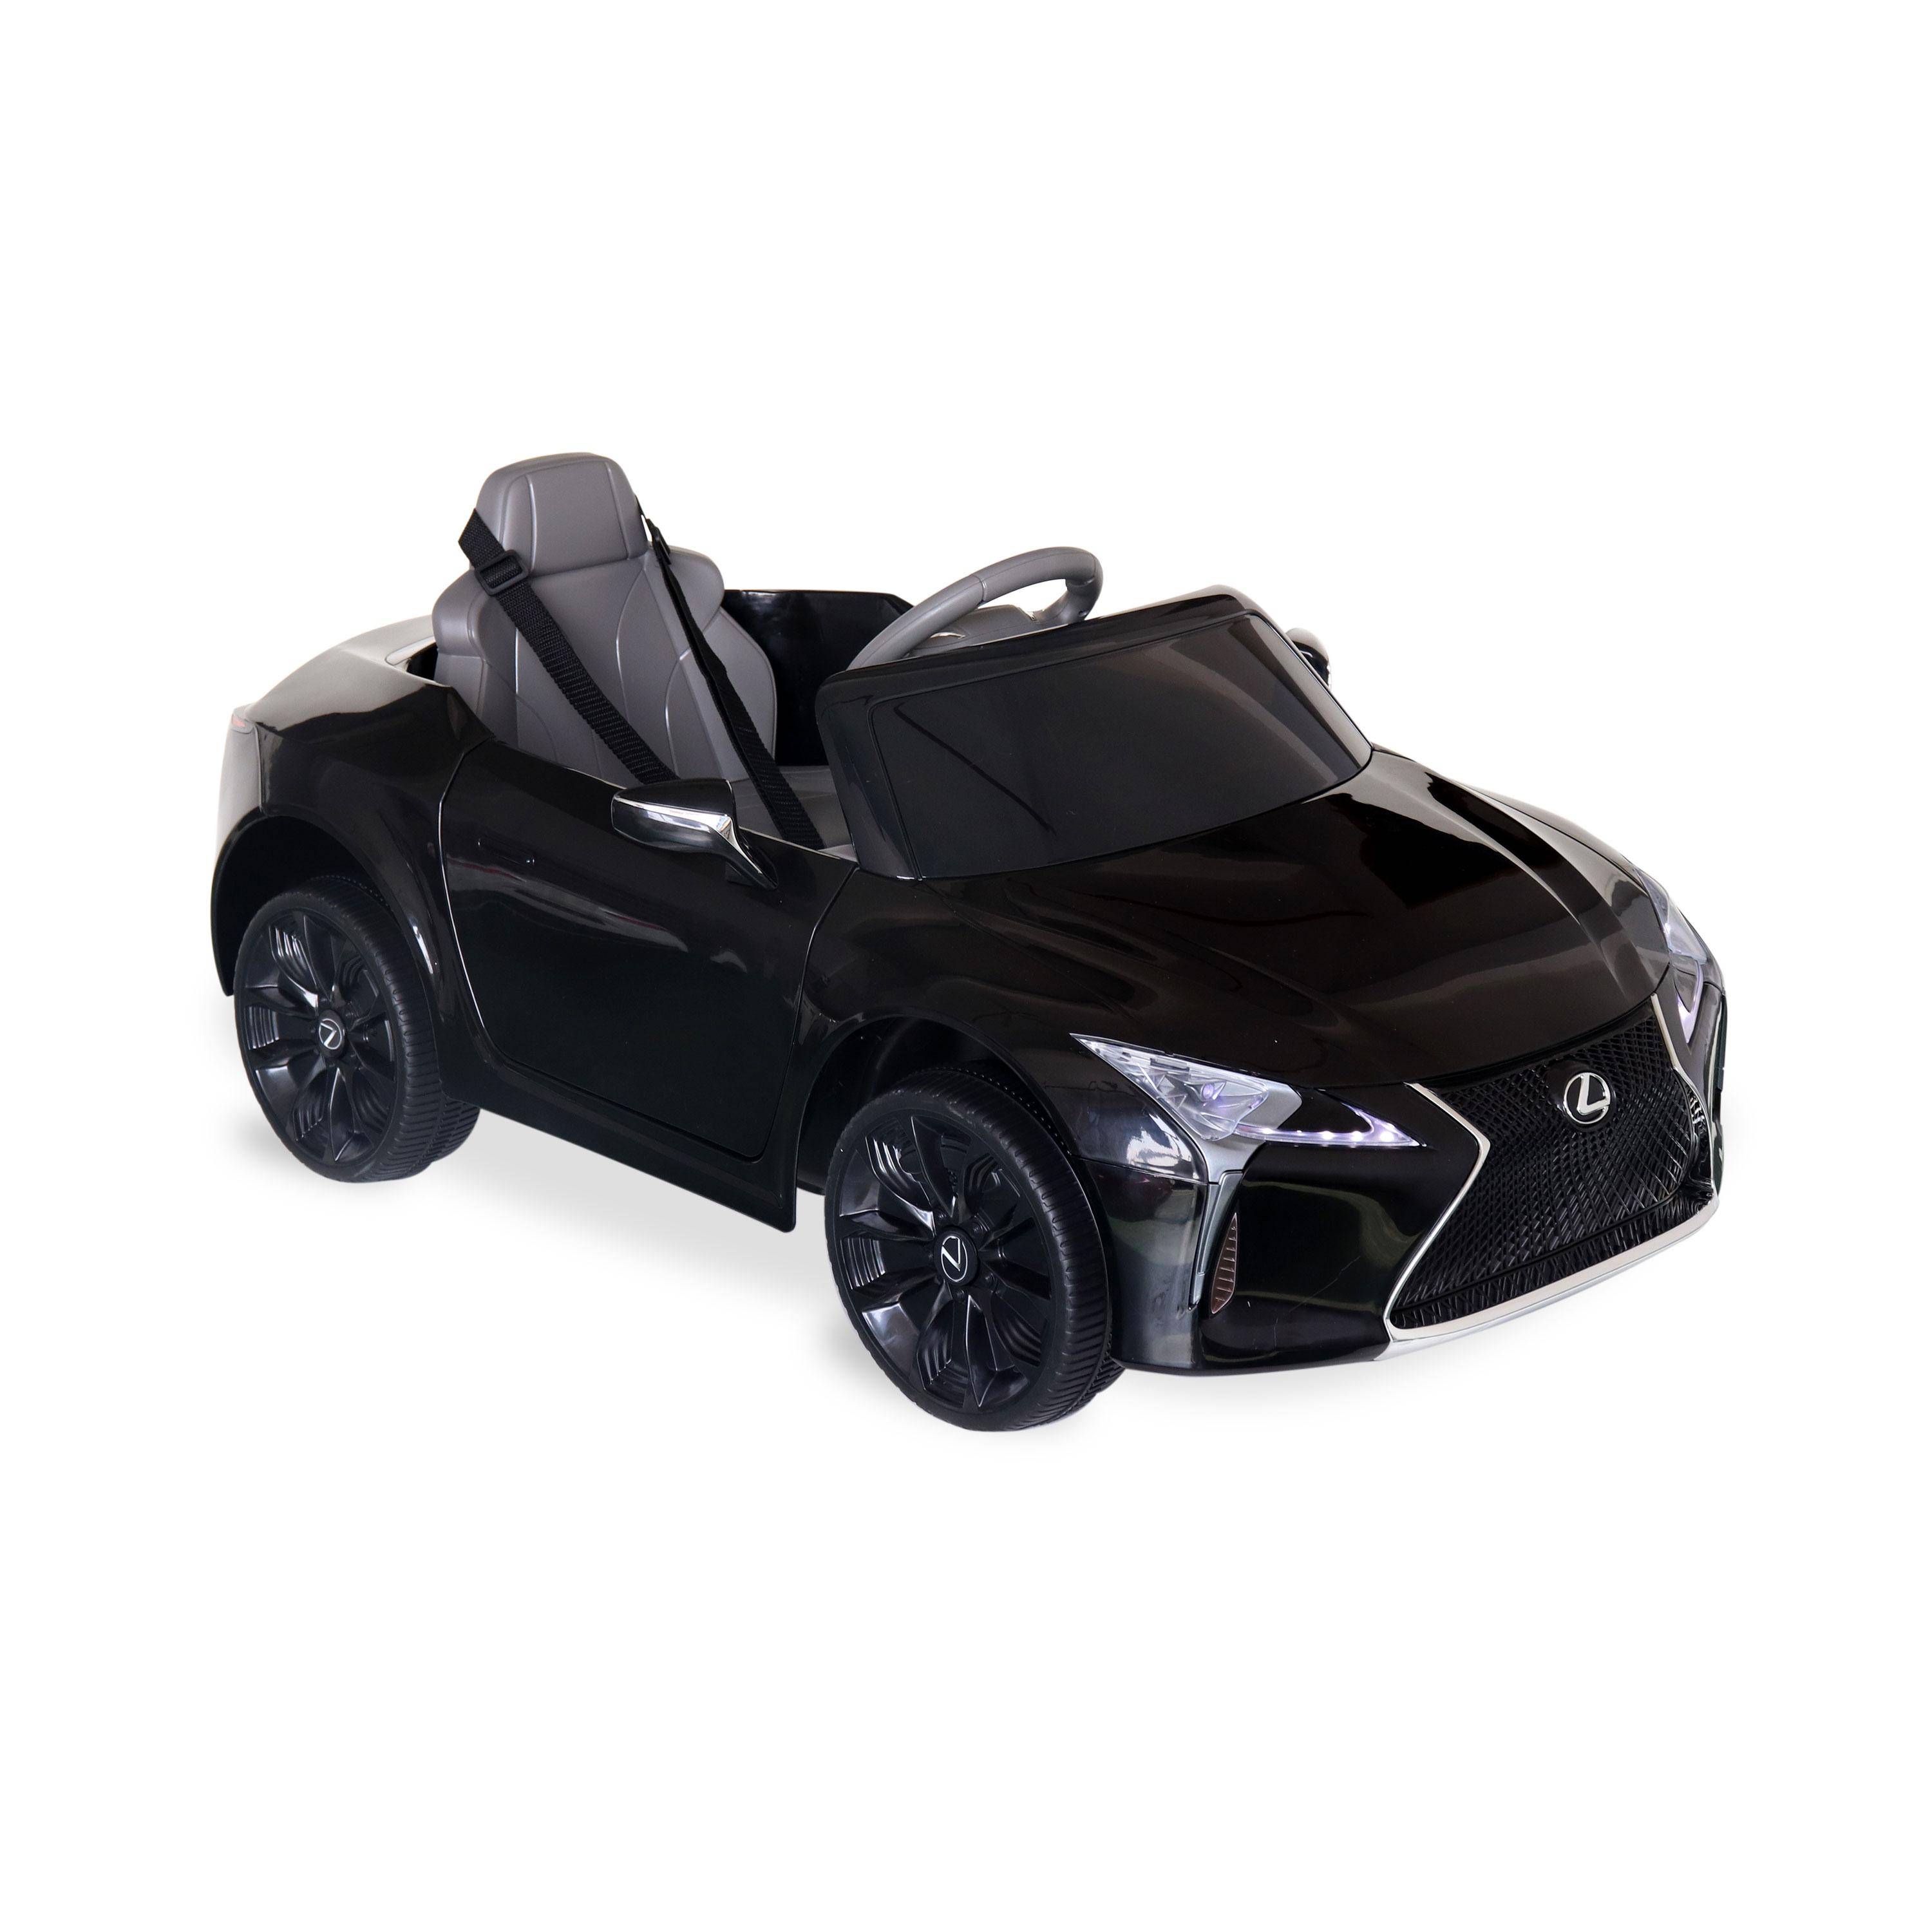 Children's electric car 12V, 1 seat, 4x4 with car radio and remote control - Lexus LC500 - Black,sweeek,Photo2